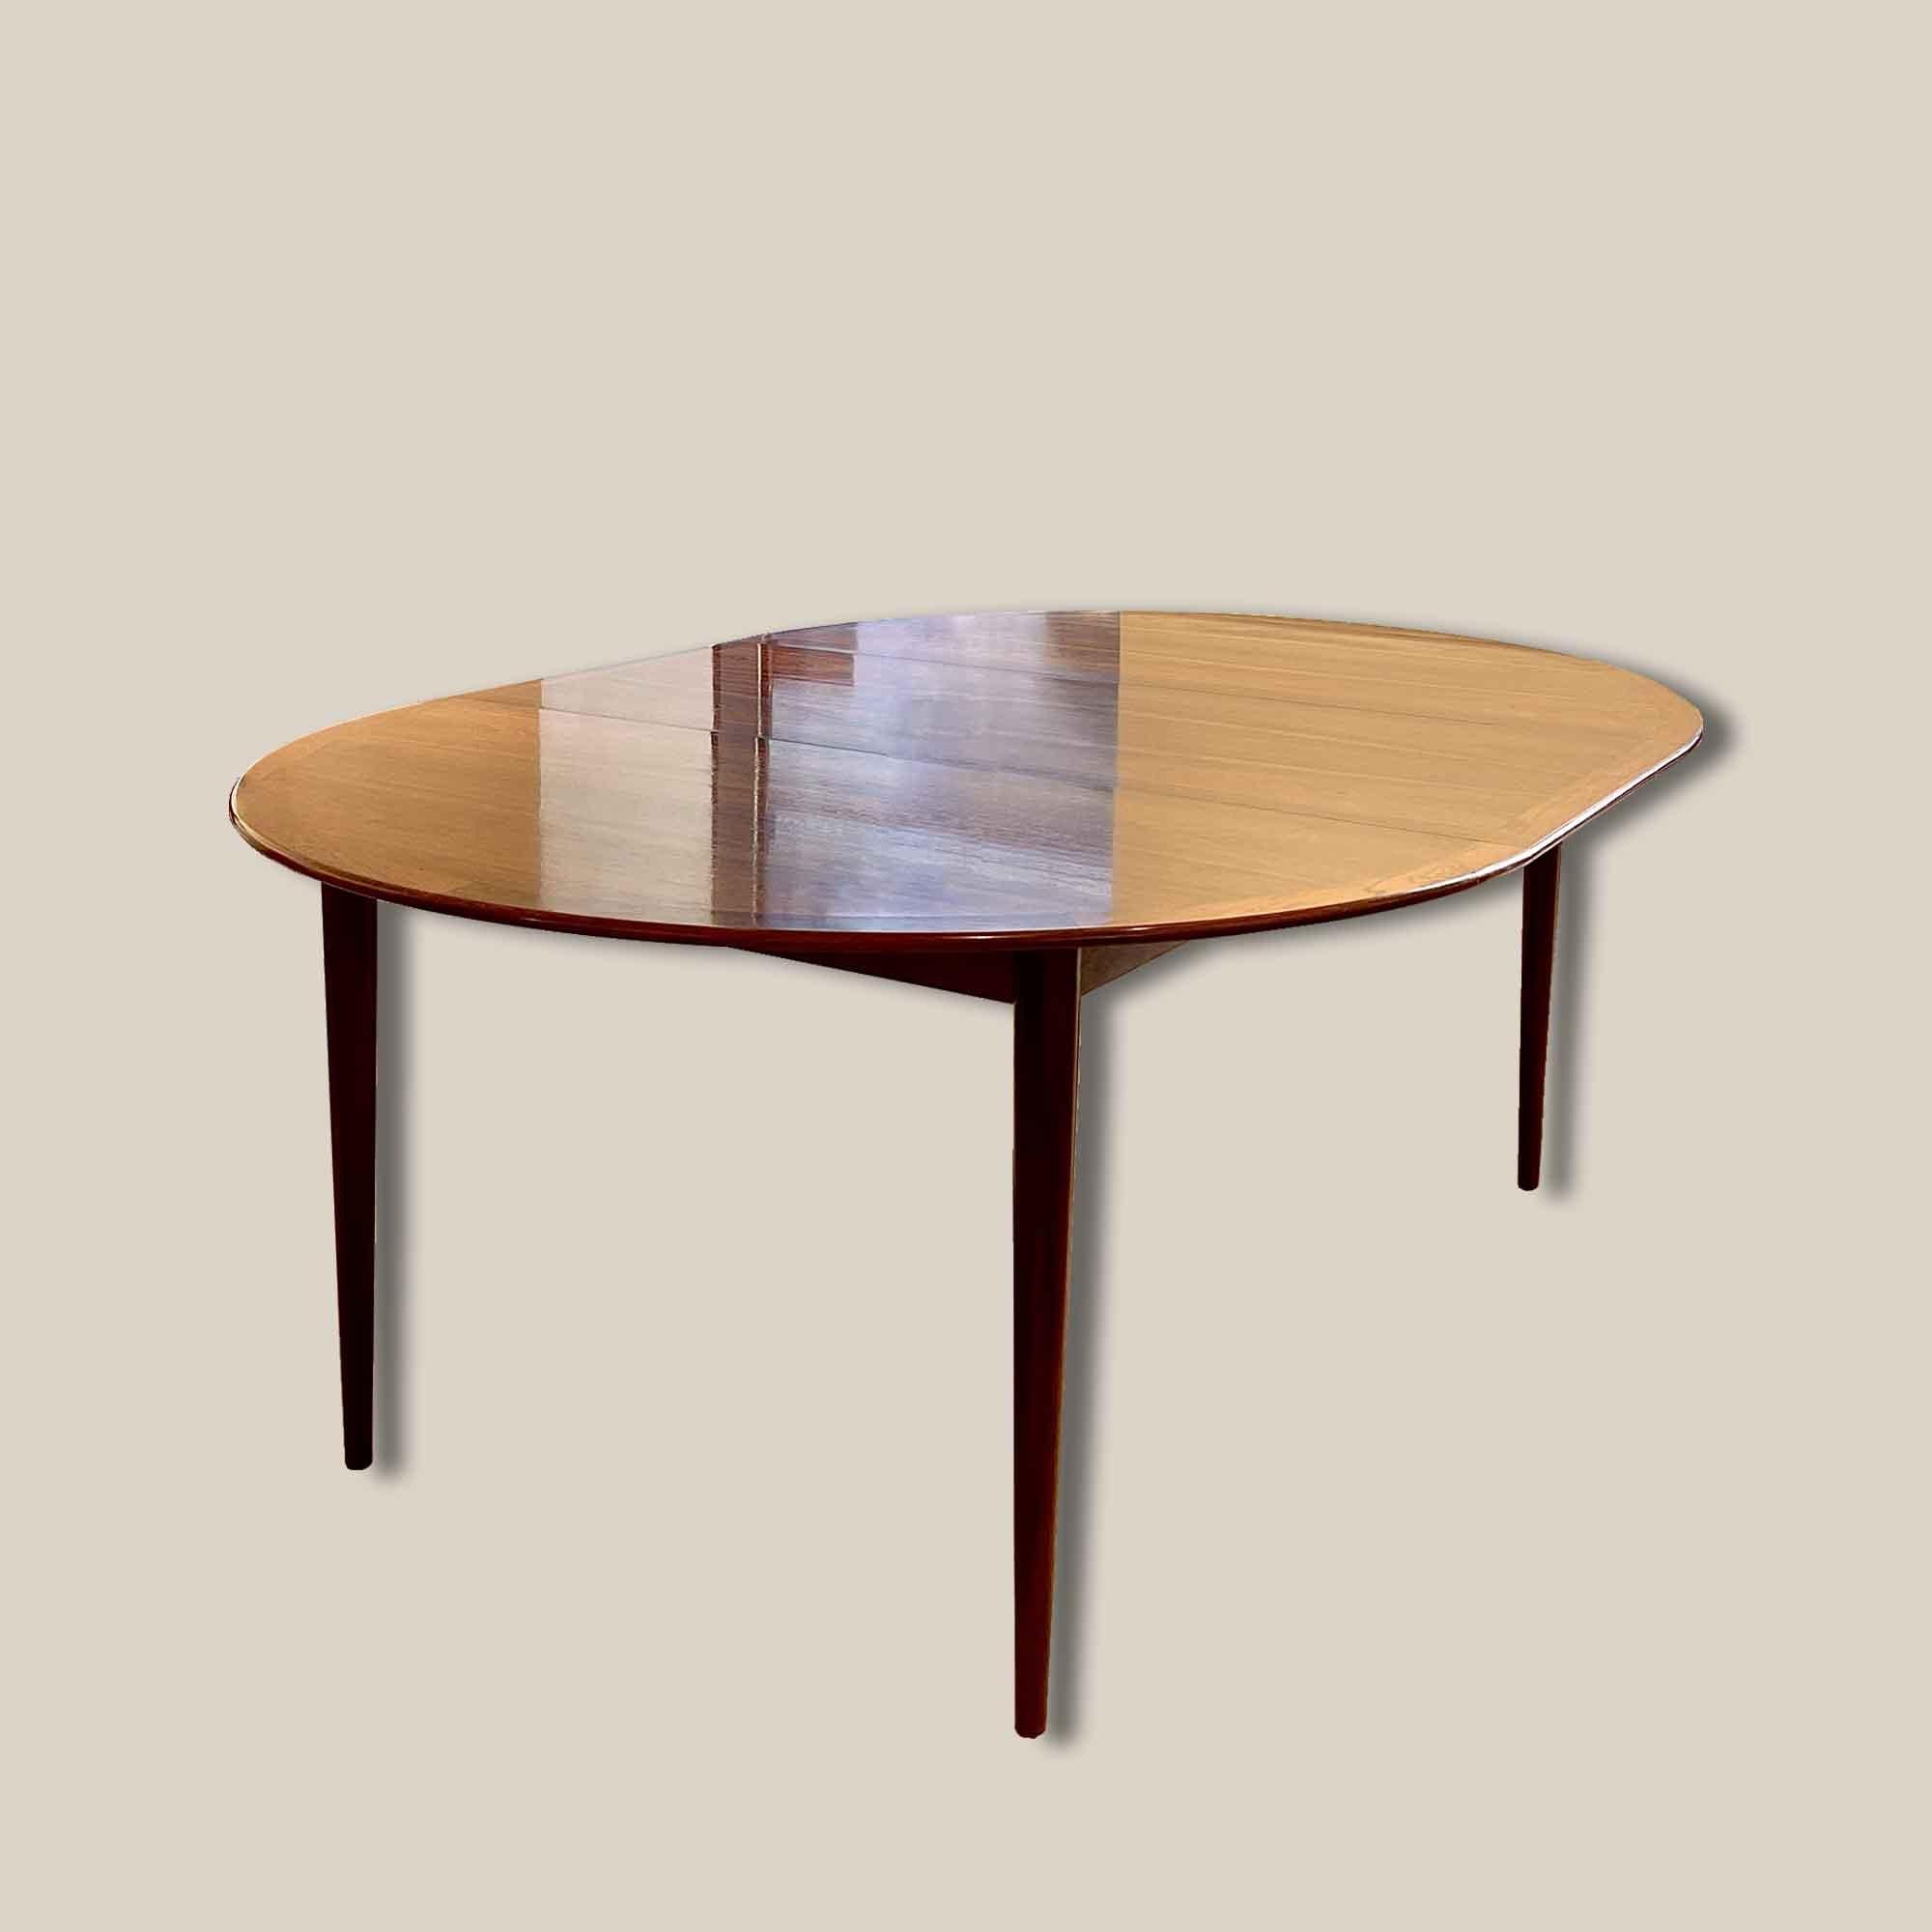 The clean lines and minimalist details of this table make it an elegant and timeless choice. Its simple aesthetic allows it to blend seamlessly into a variety of decor styles.
Rosewood brings natural warmth to your space, plus the Scandinavian